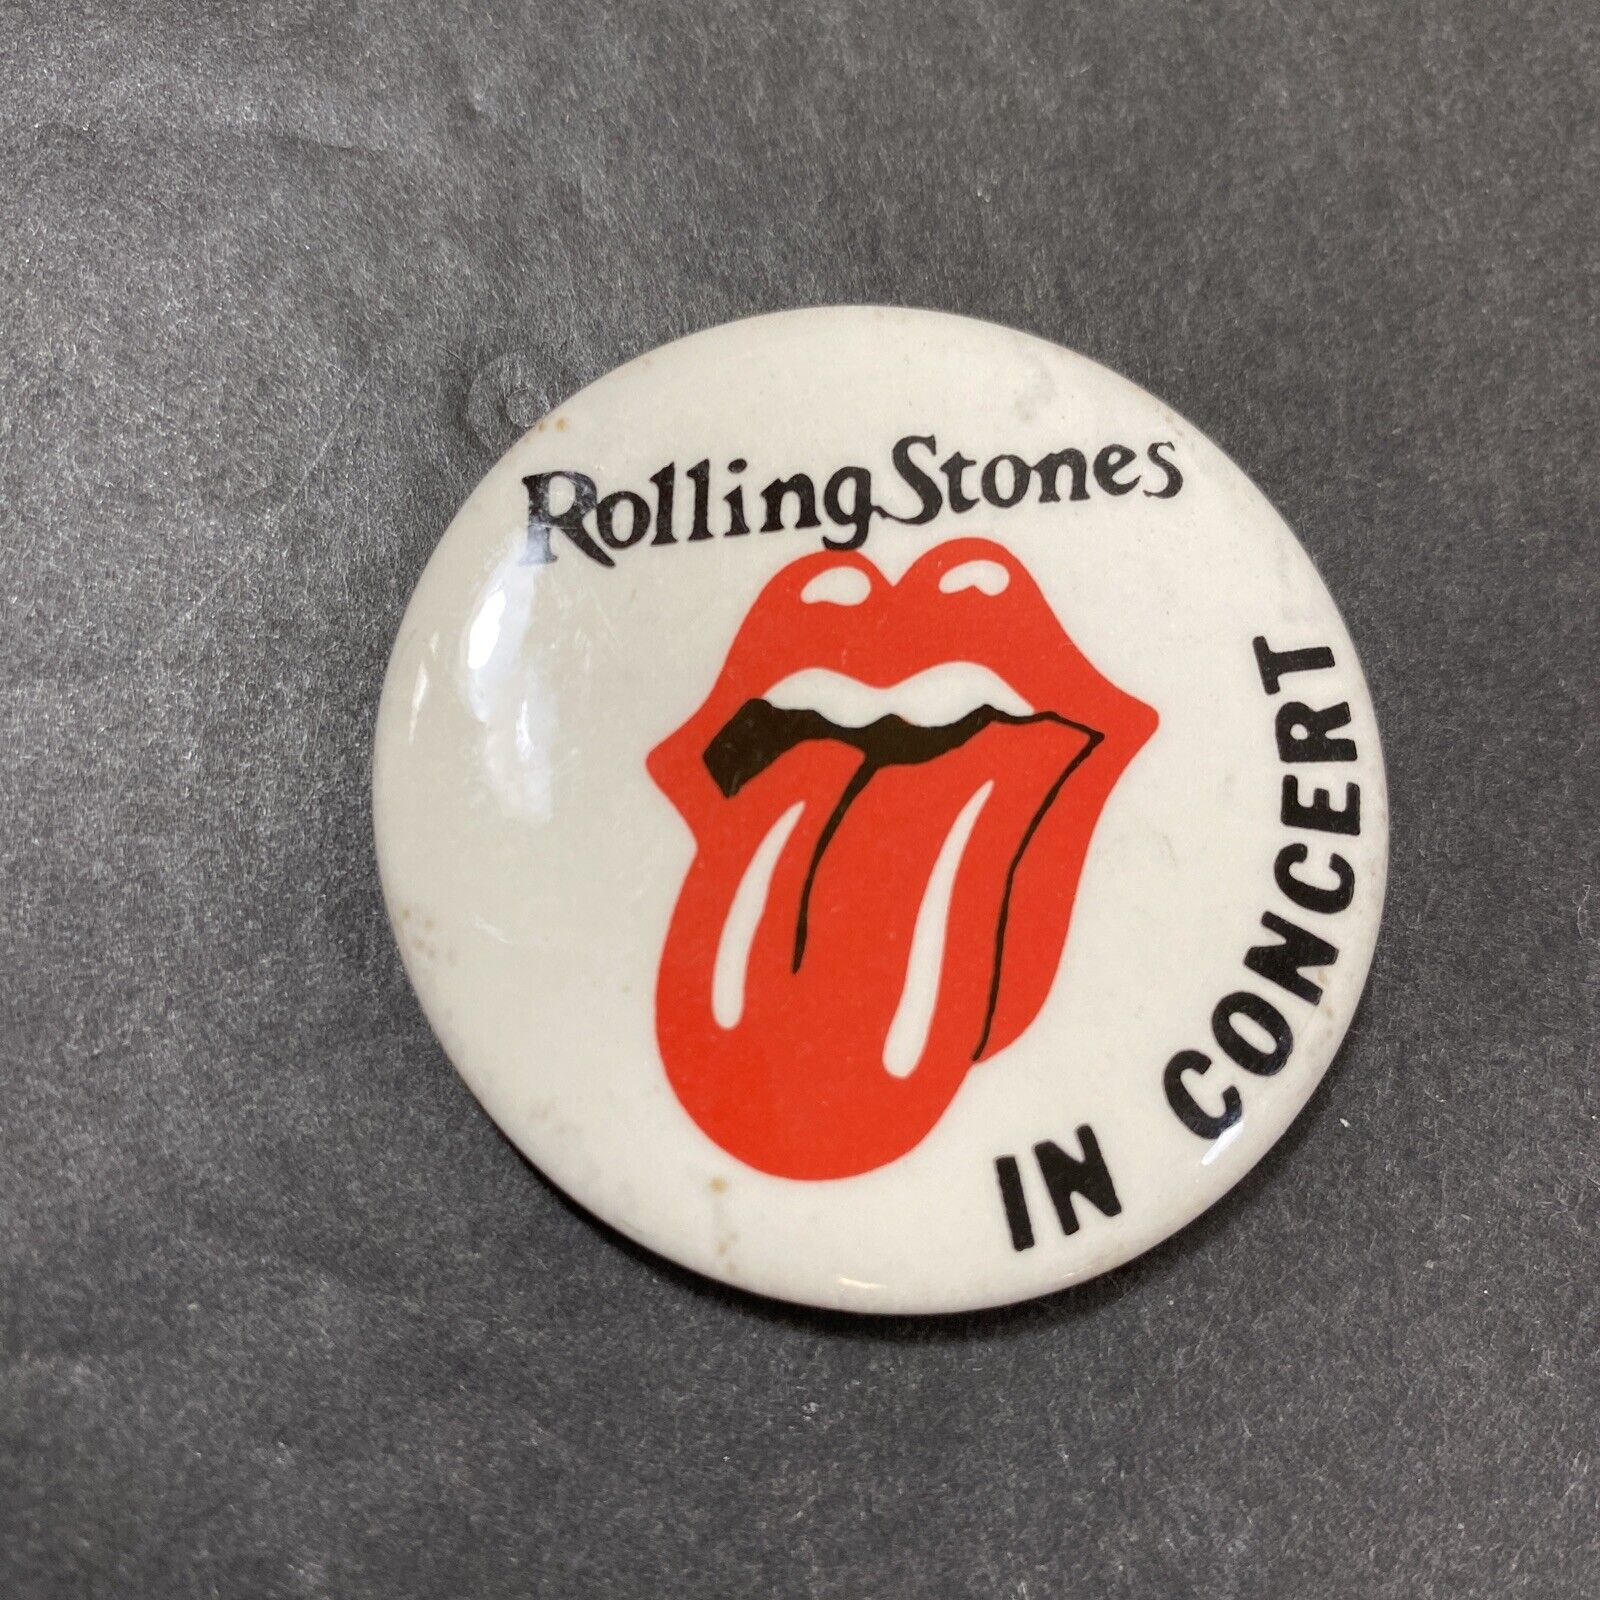 Vintage 1980's Rolling Stones in Concert Tour Pinback Button Mick Jagger